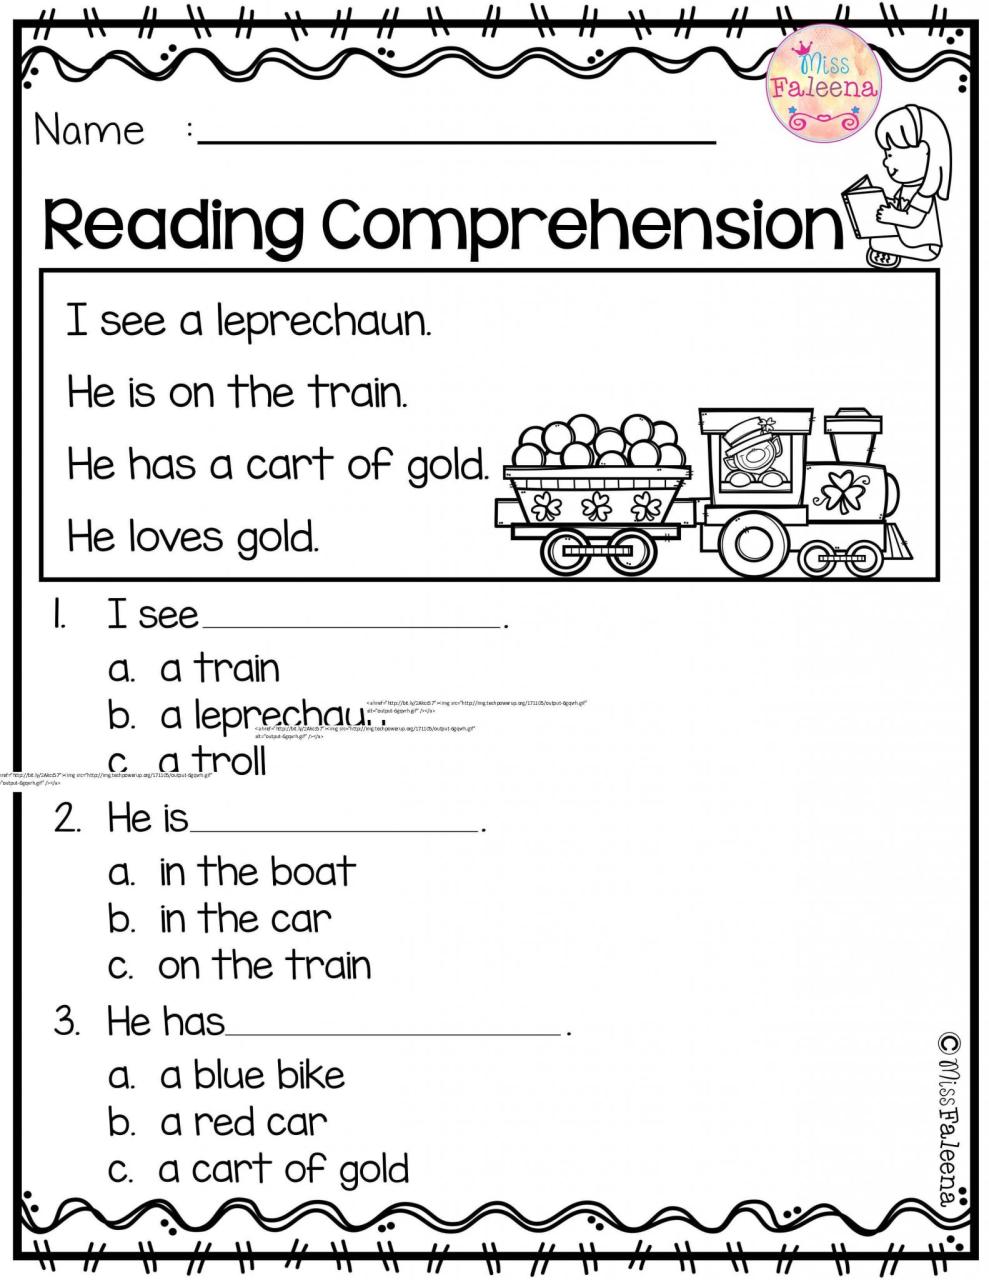 Reading Comprehension Worksheets Multiple Choice 3Rd Grade